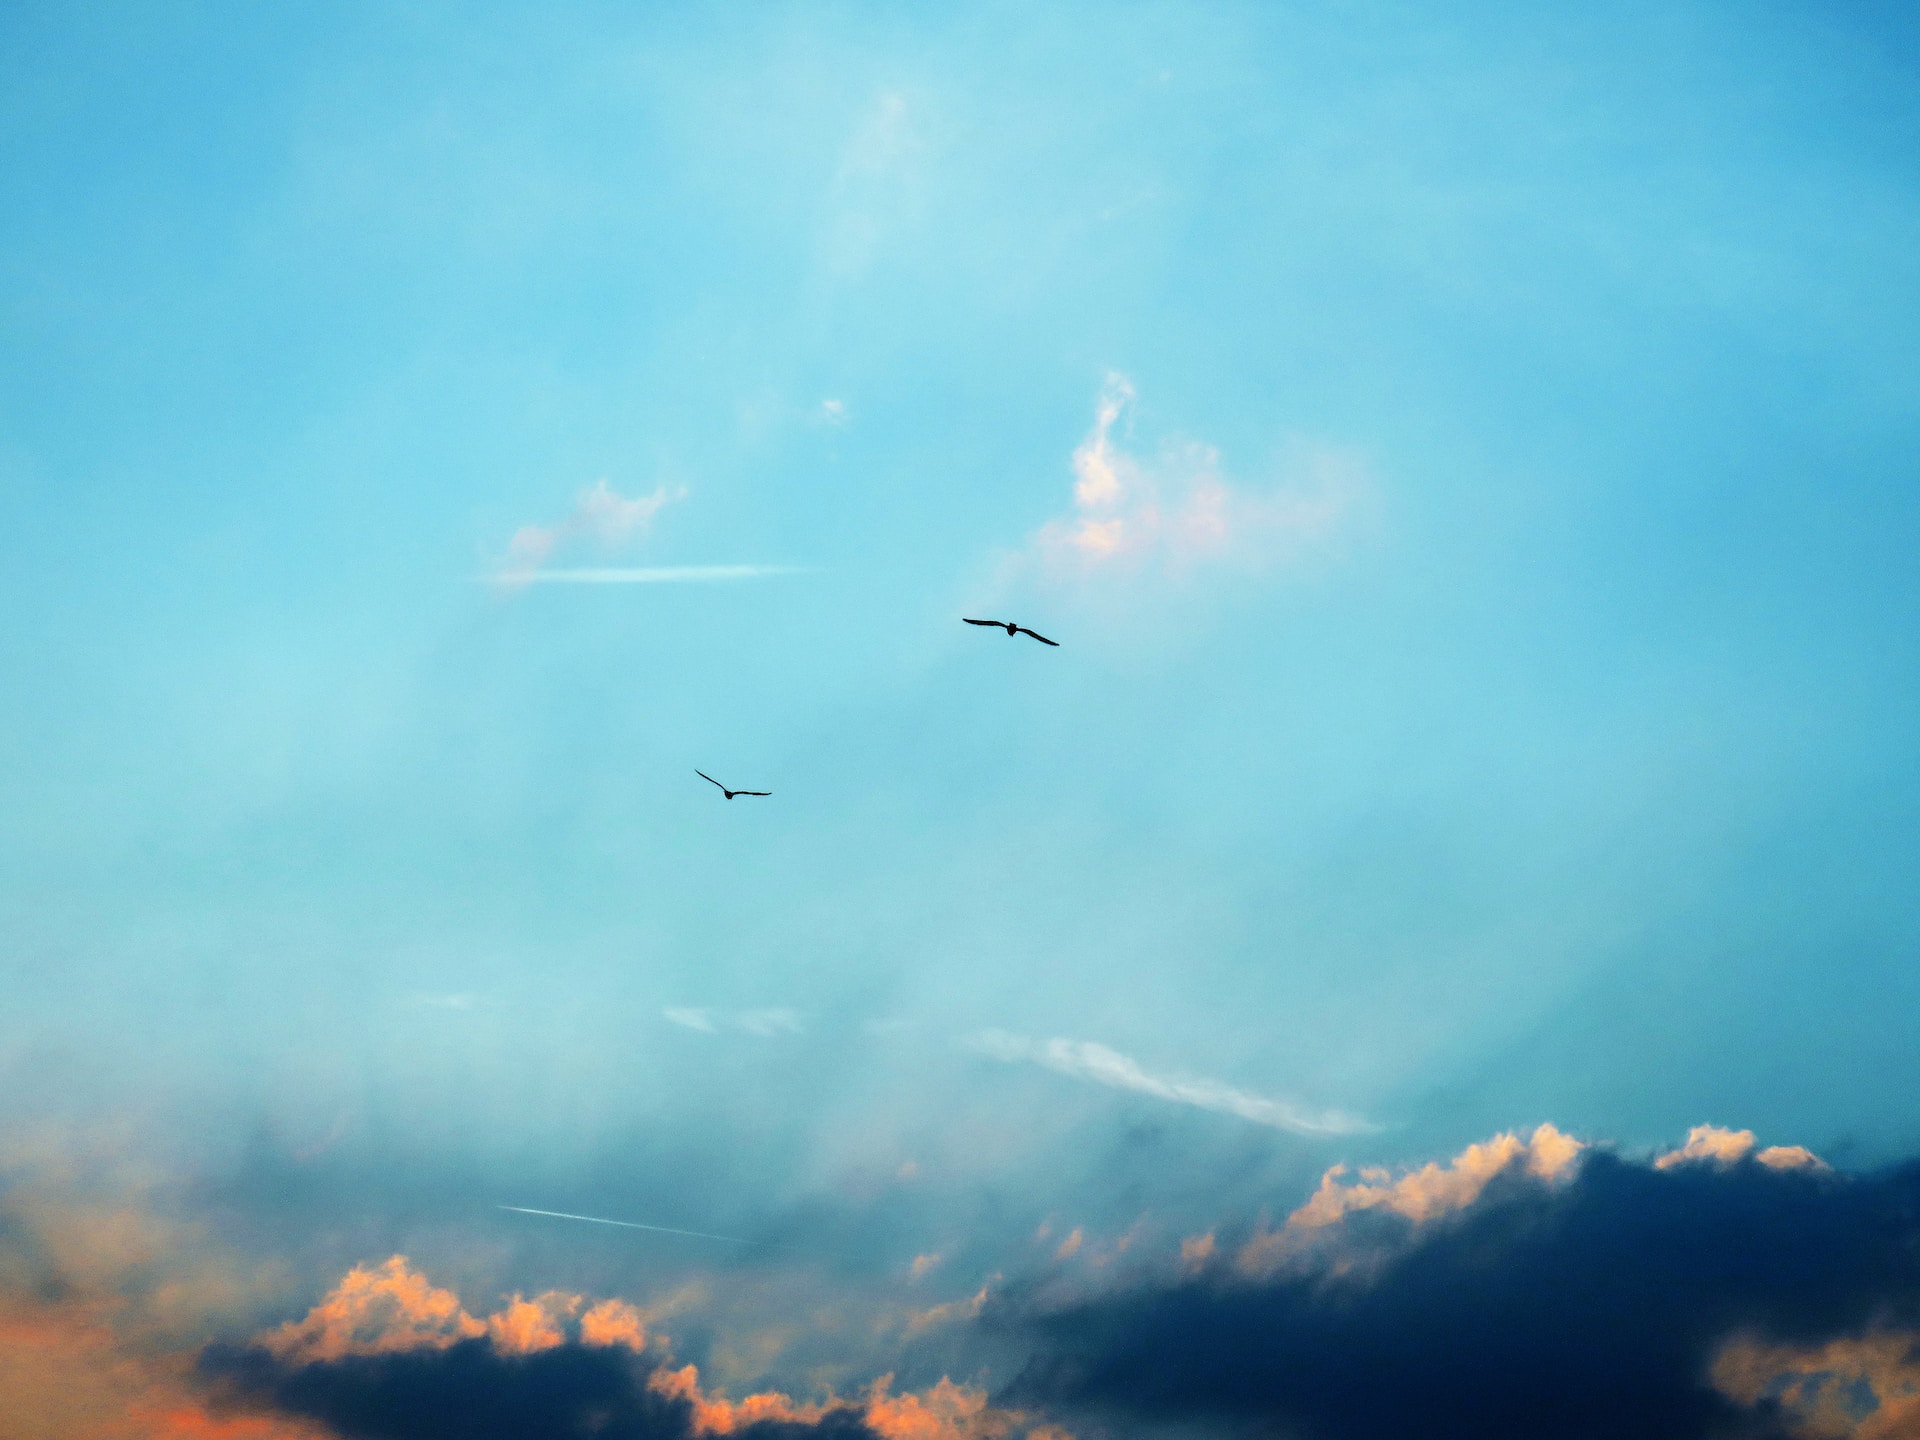 Two birds flying in the distant blue sky